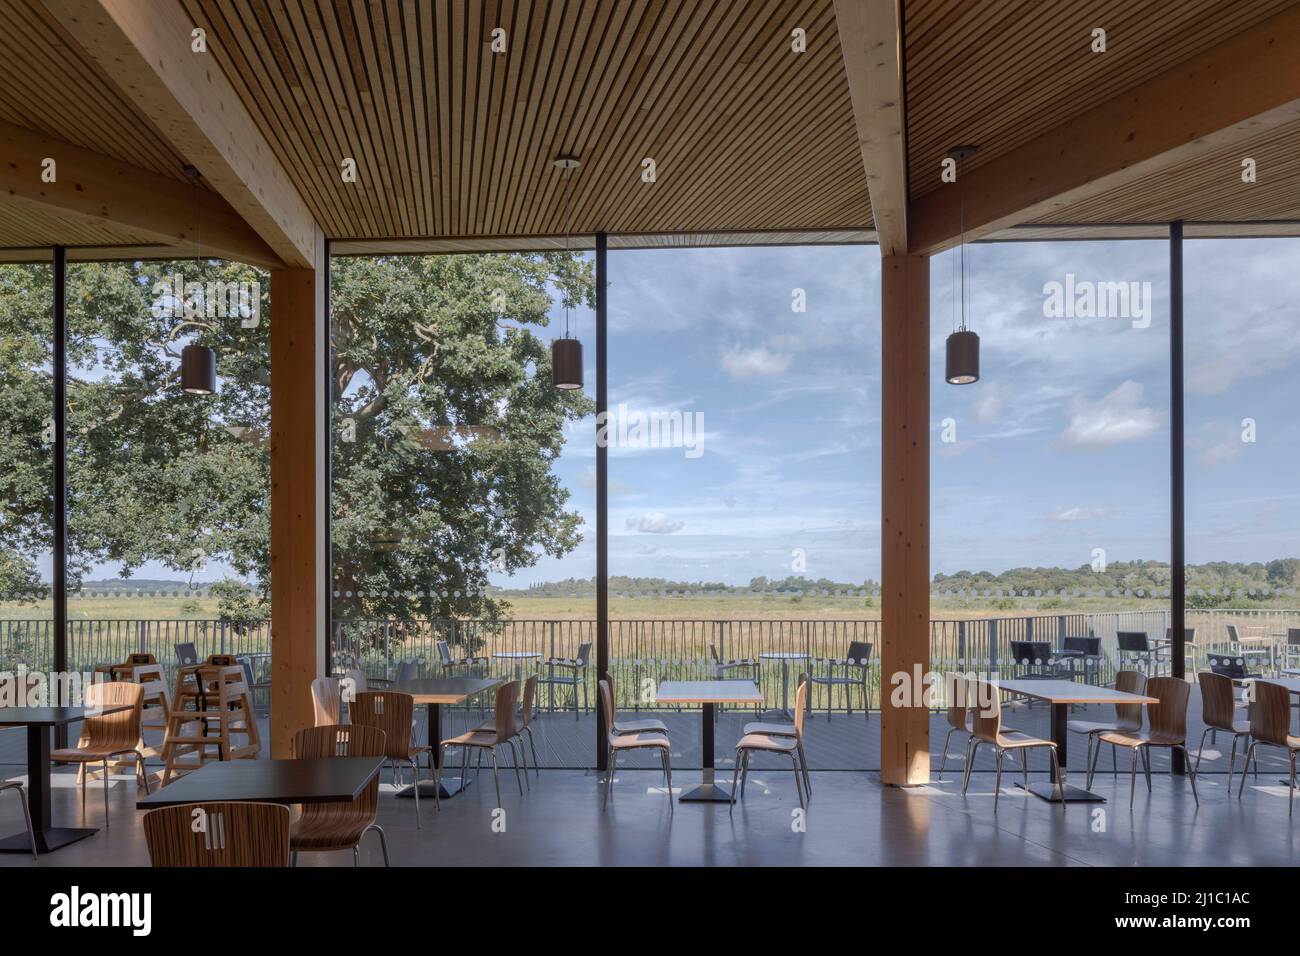 Café with view to marsh. Carlton Marshes Visitor Centre, Carlton Colville, Lowestoft, United Kingdom. Architect: Cowper Griffith Architects, 2021. Stock Photo